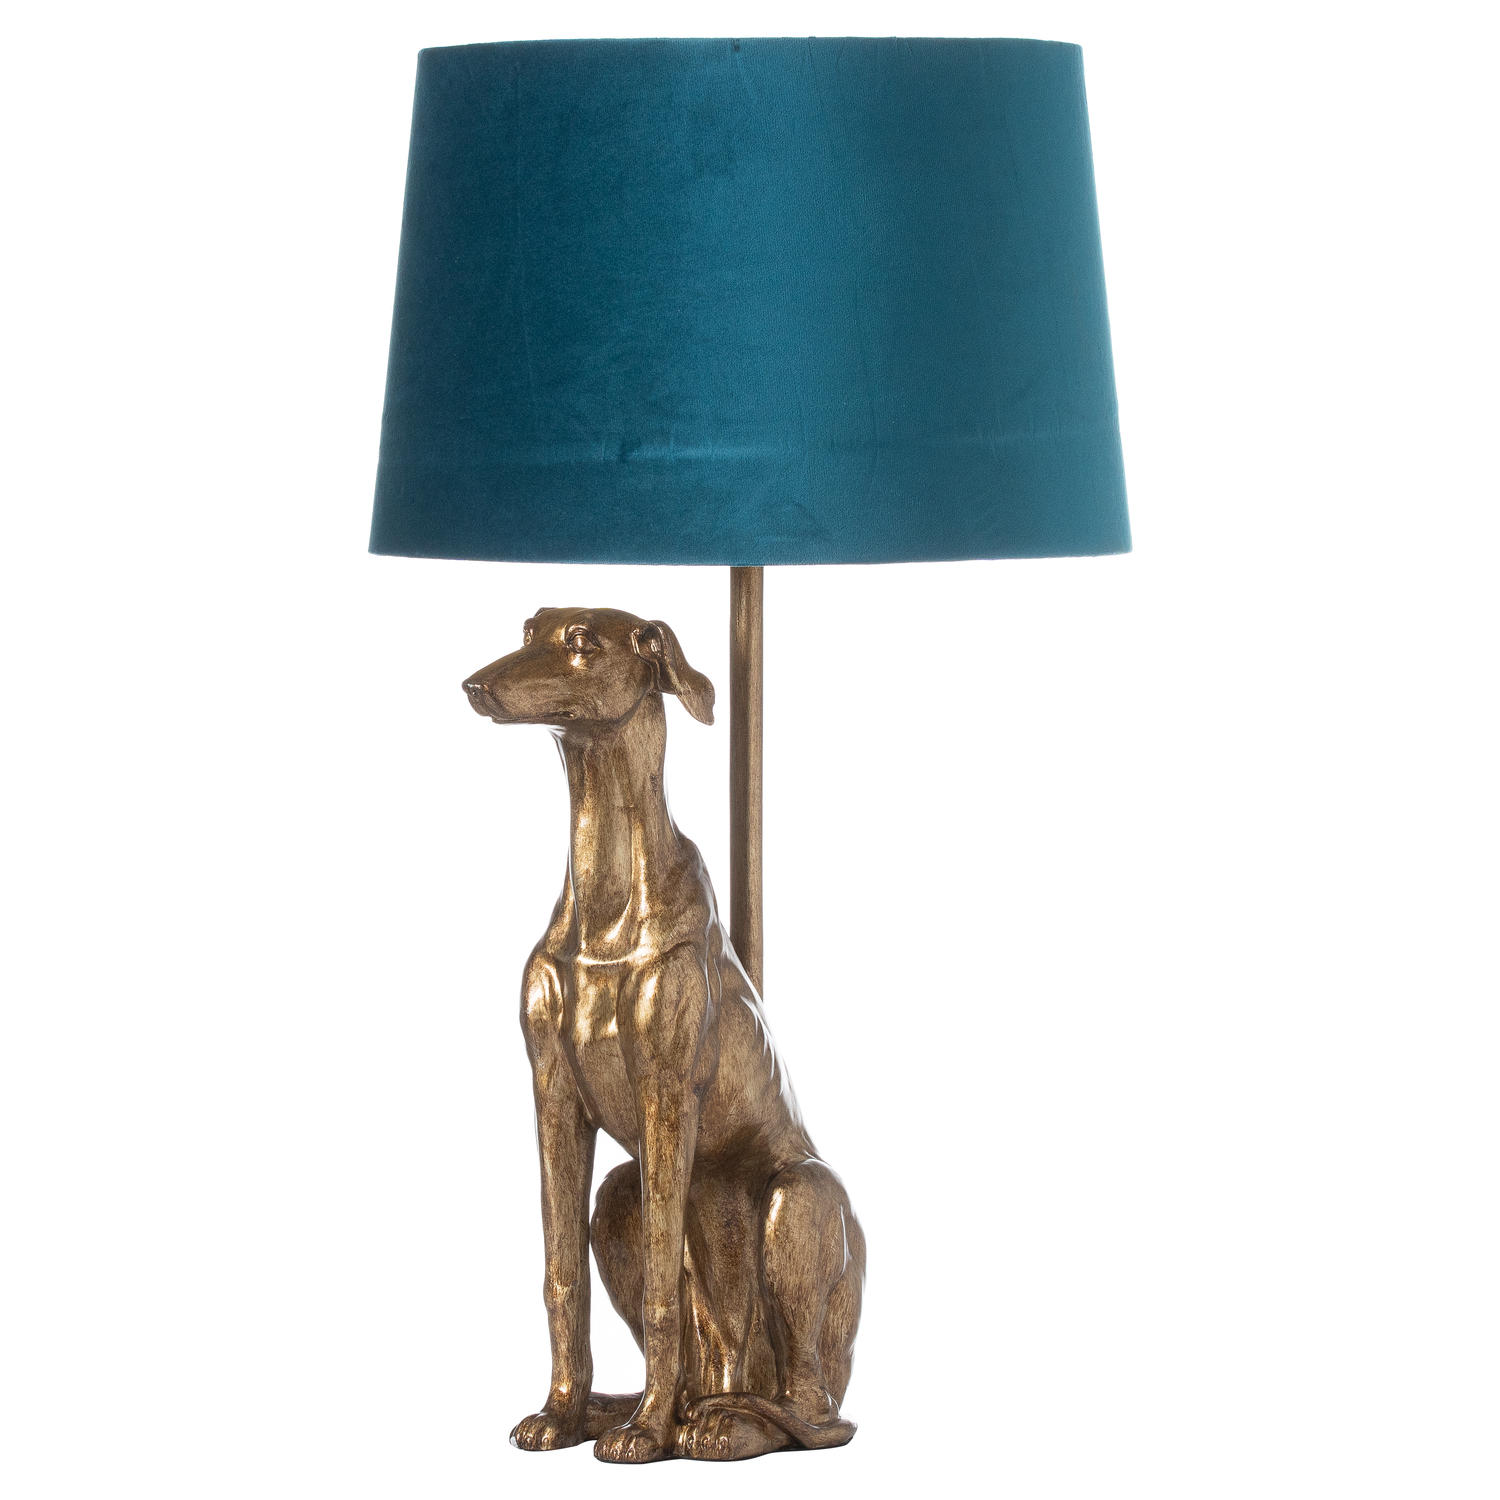 William The Whippet Table Lamp With Teal Velvet Shade - Image 1